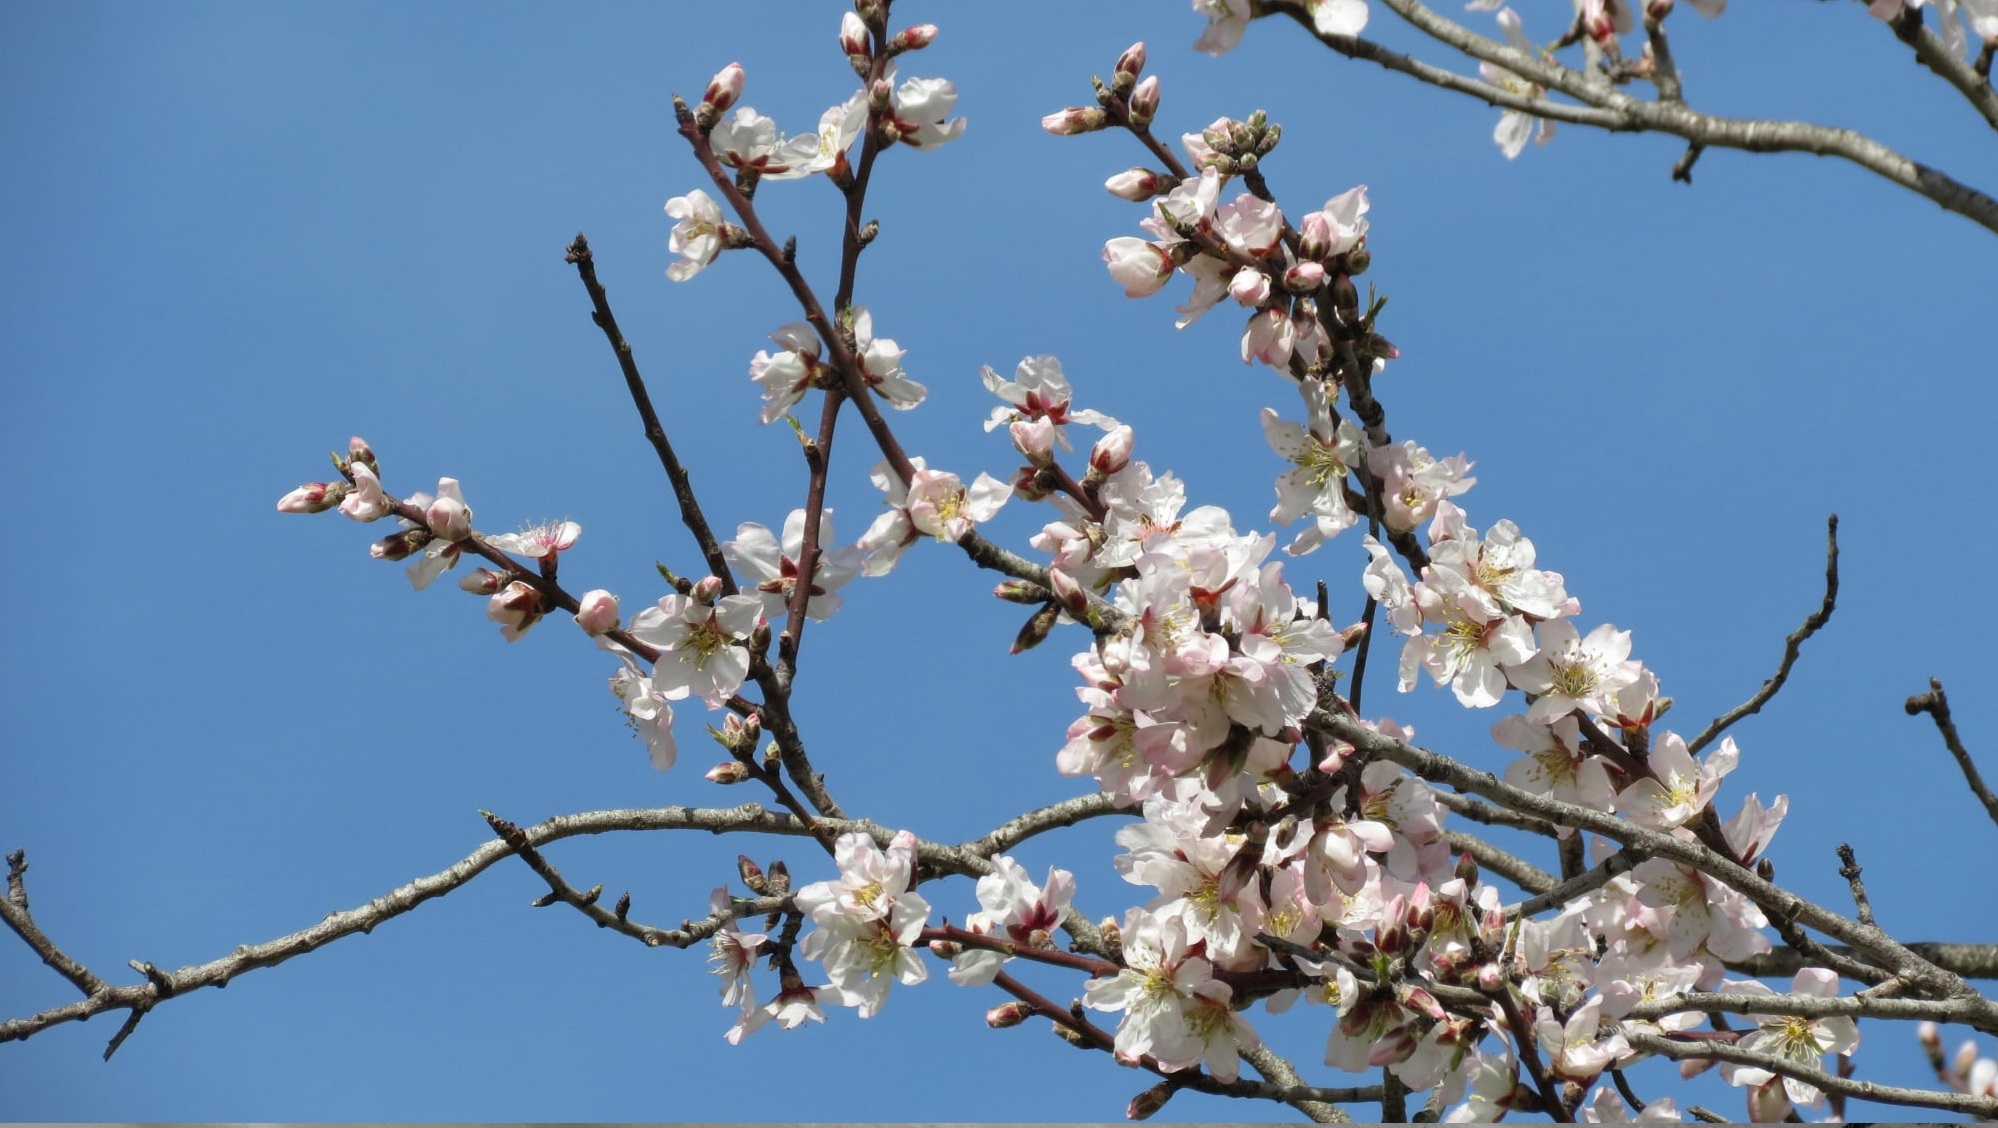 The Legend of the Almond Blossom